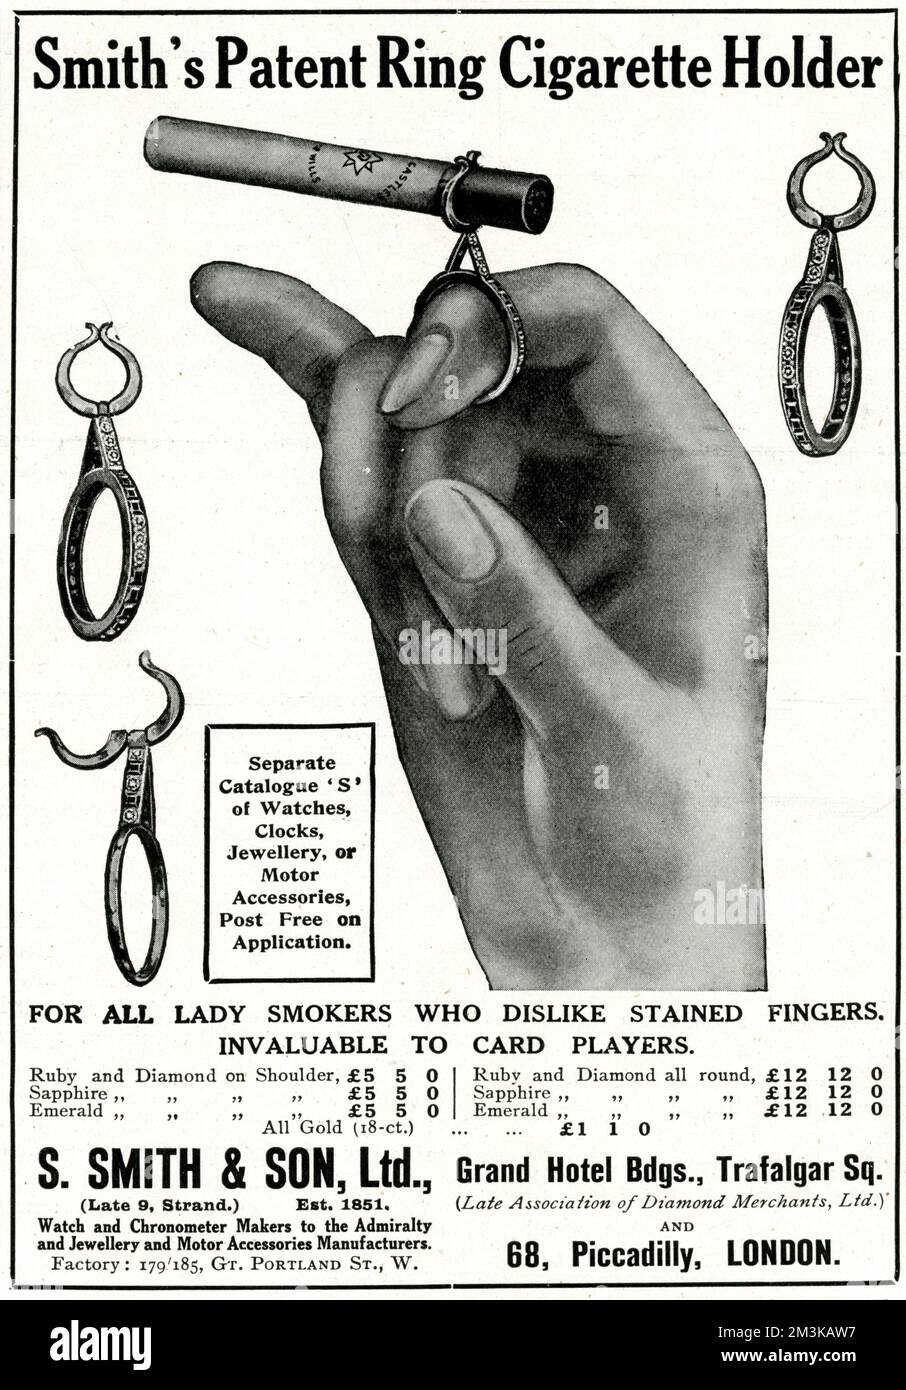 patent ring cigarette holder for ladies those who dislike stained fingers 1914 2M3KAW7